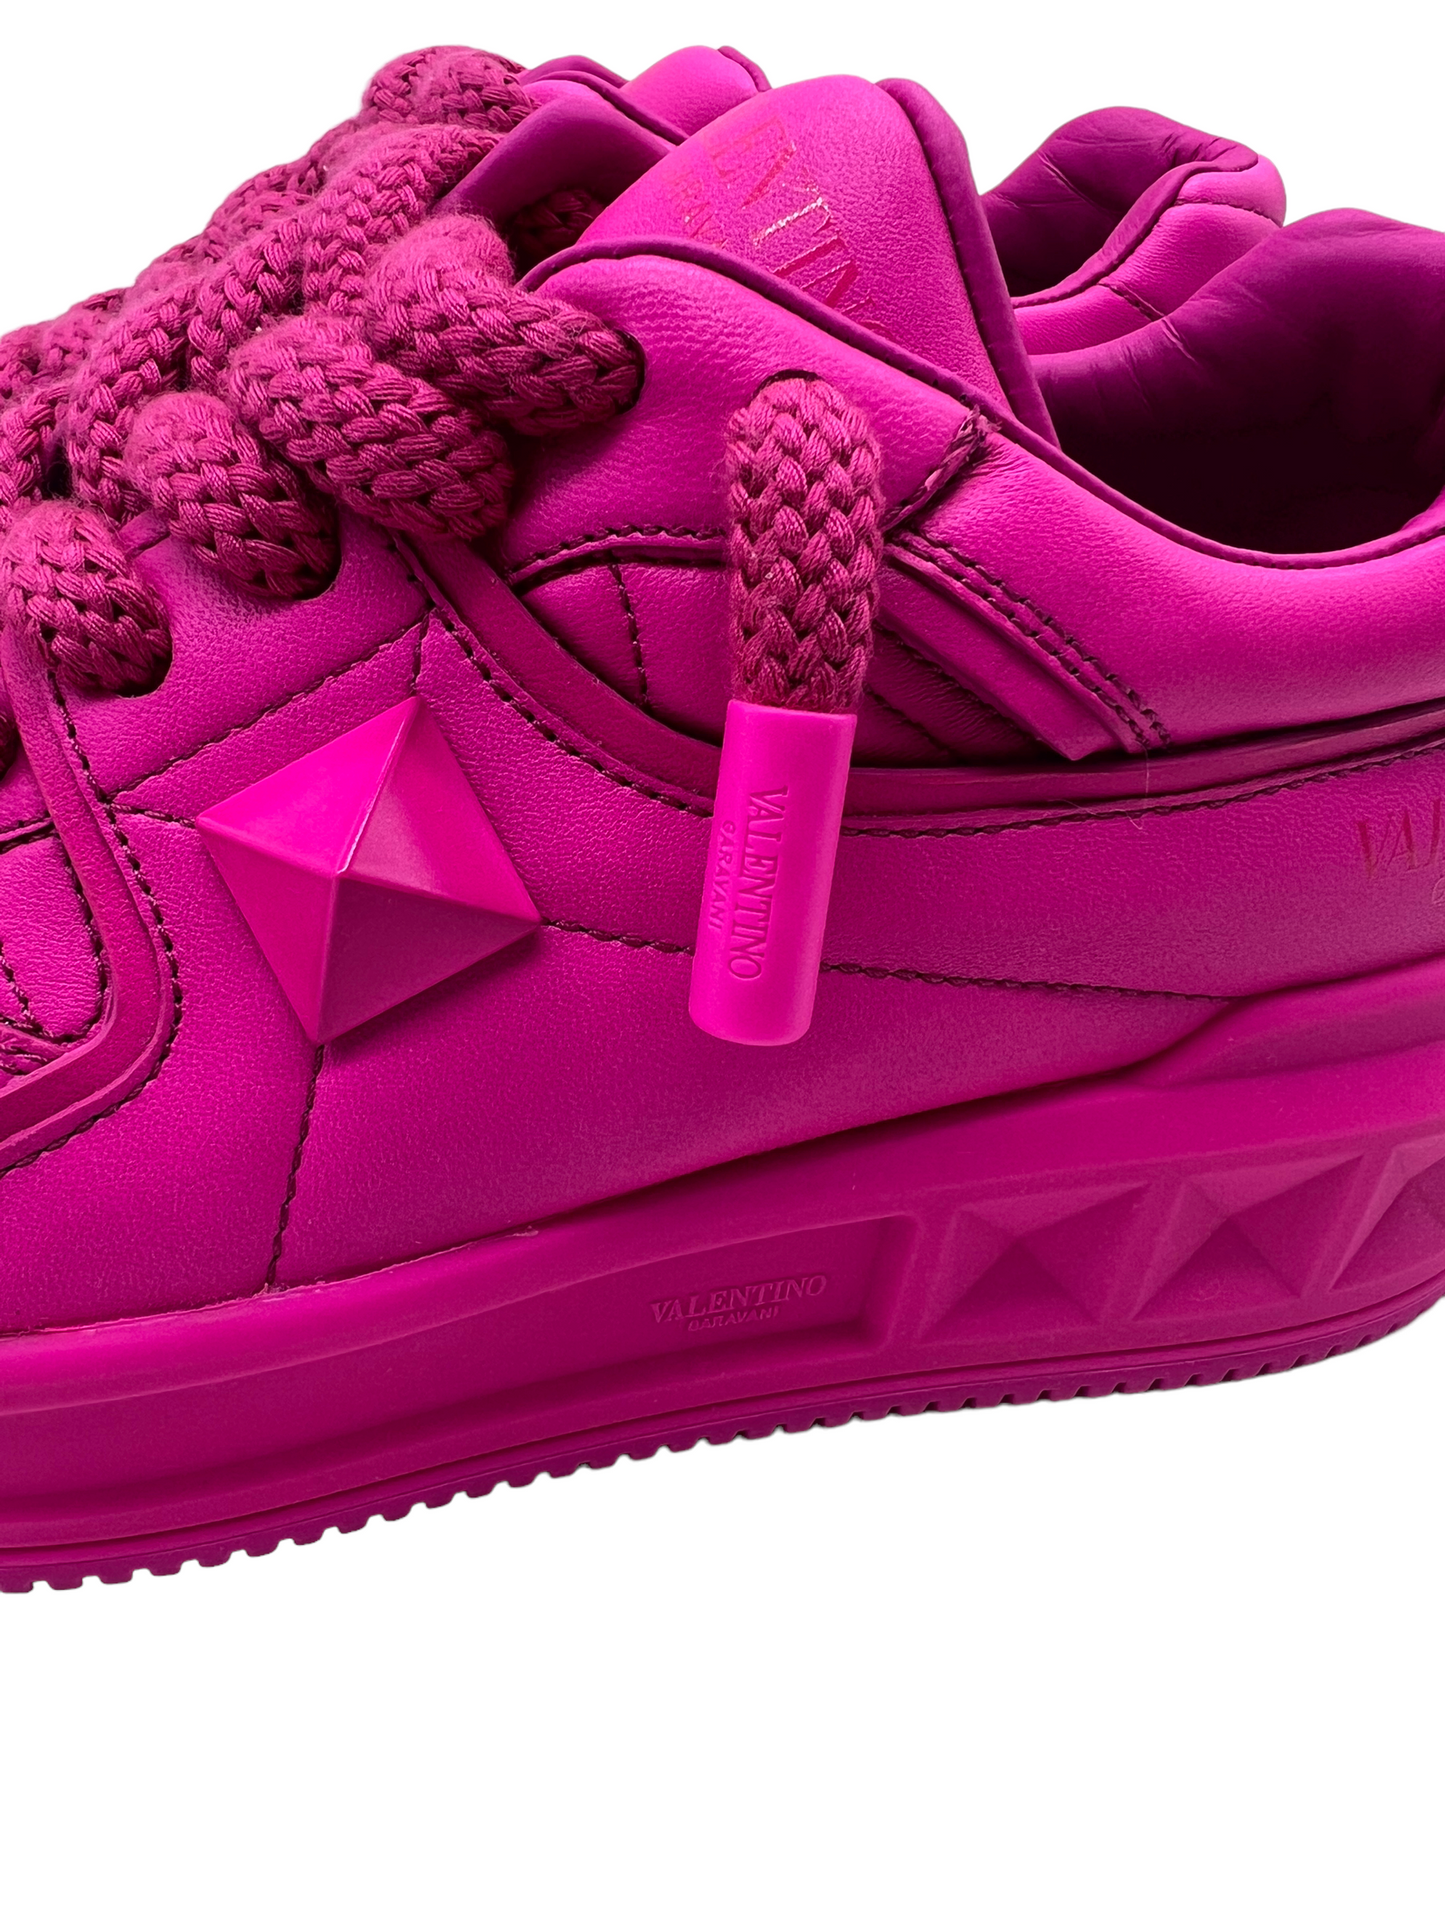 Valentino Hot Pink One Stud XL Size 40 Leather Sneakers